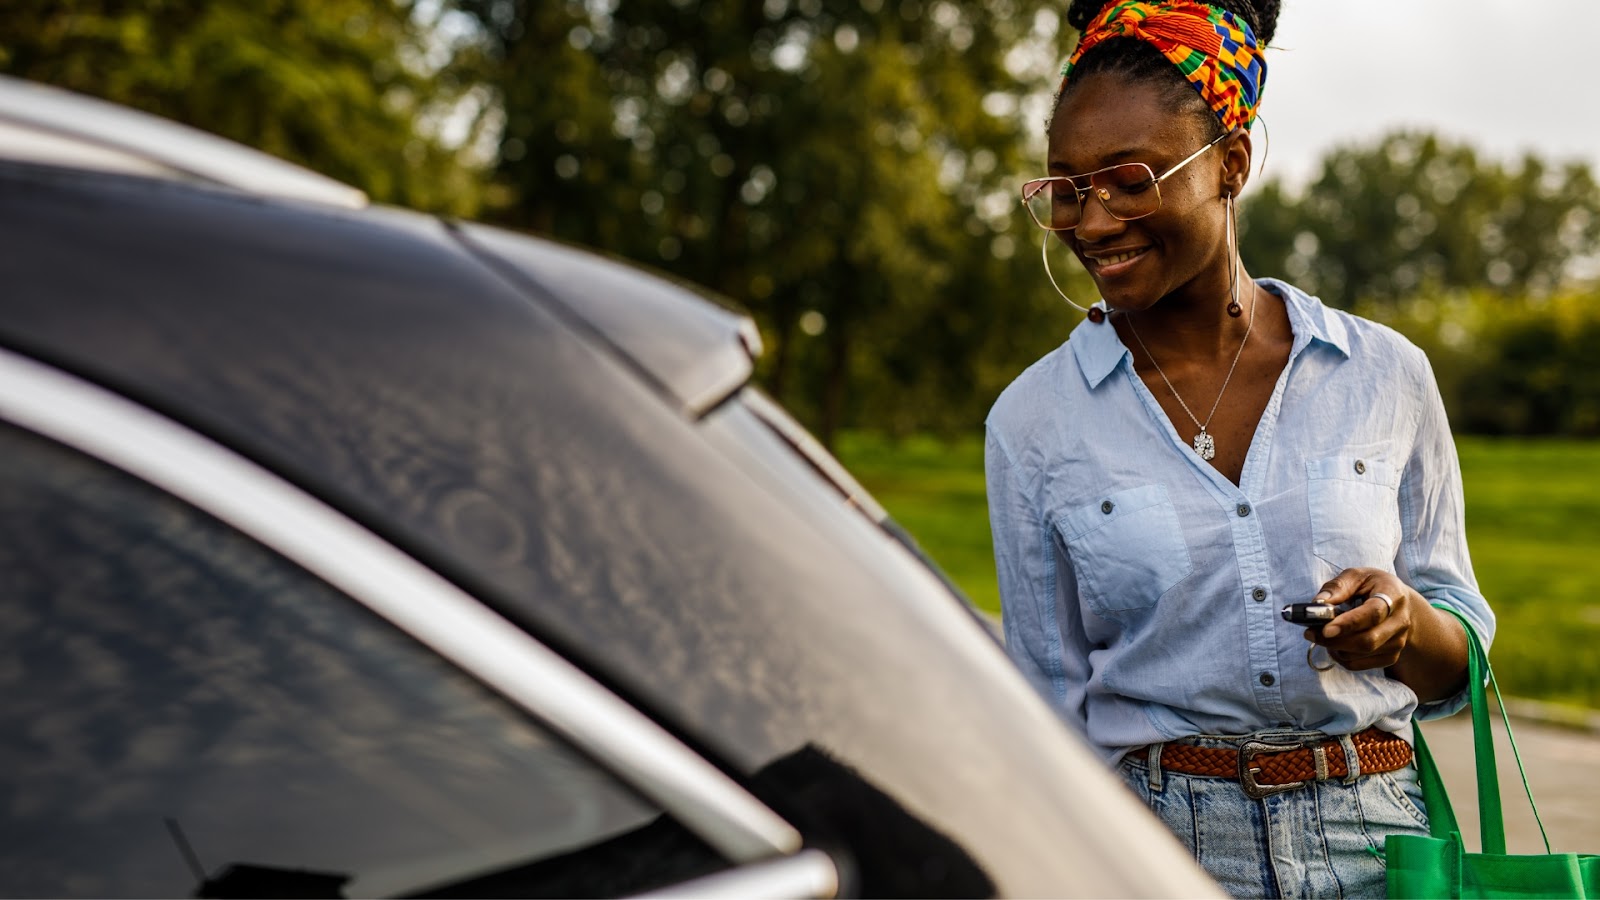 A cheerful woman stands by her car, holding the smart car key, ready to unlock the vehicle.